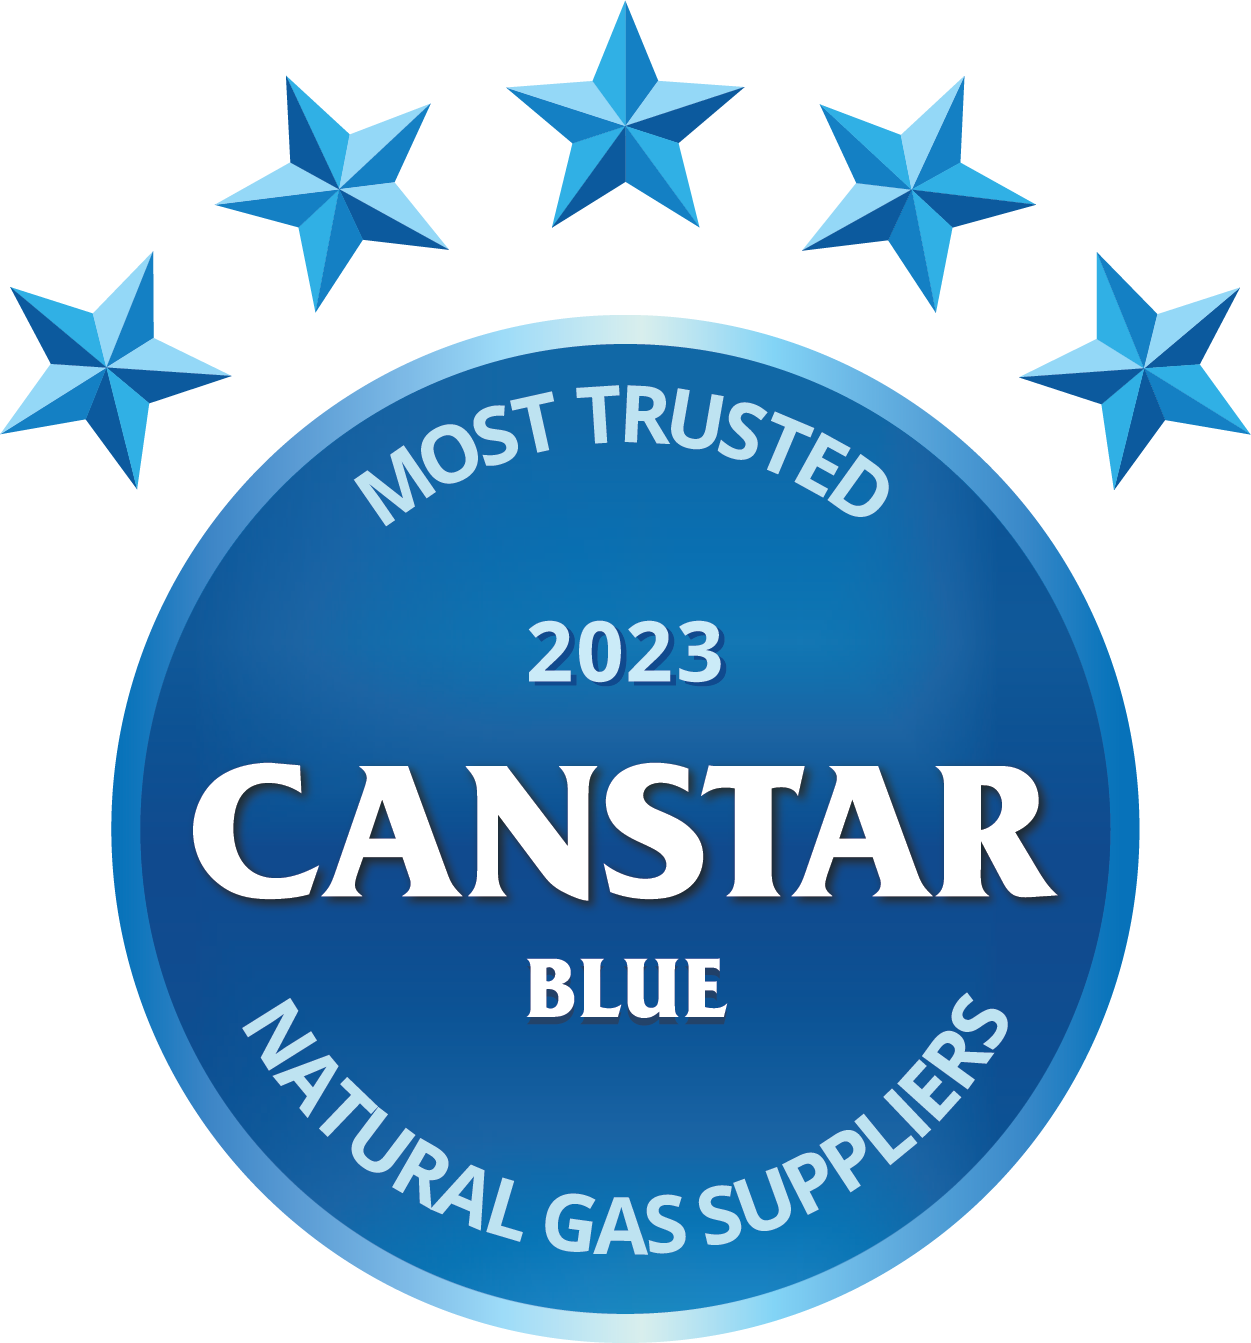 2023 Most trusted award